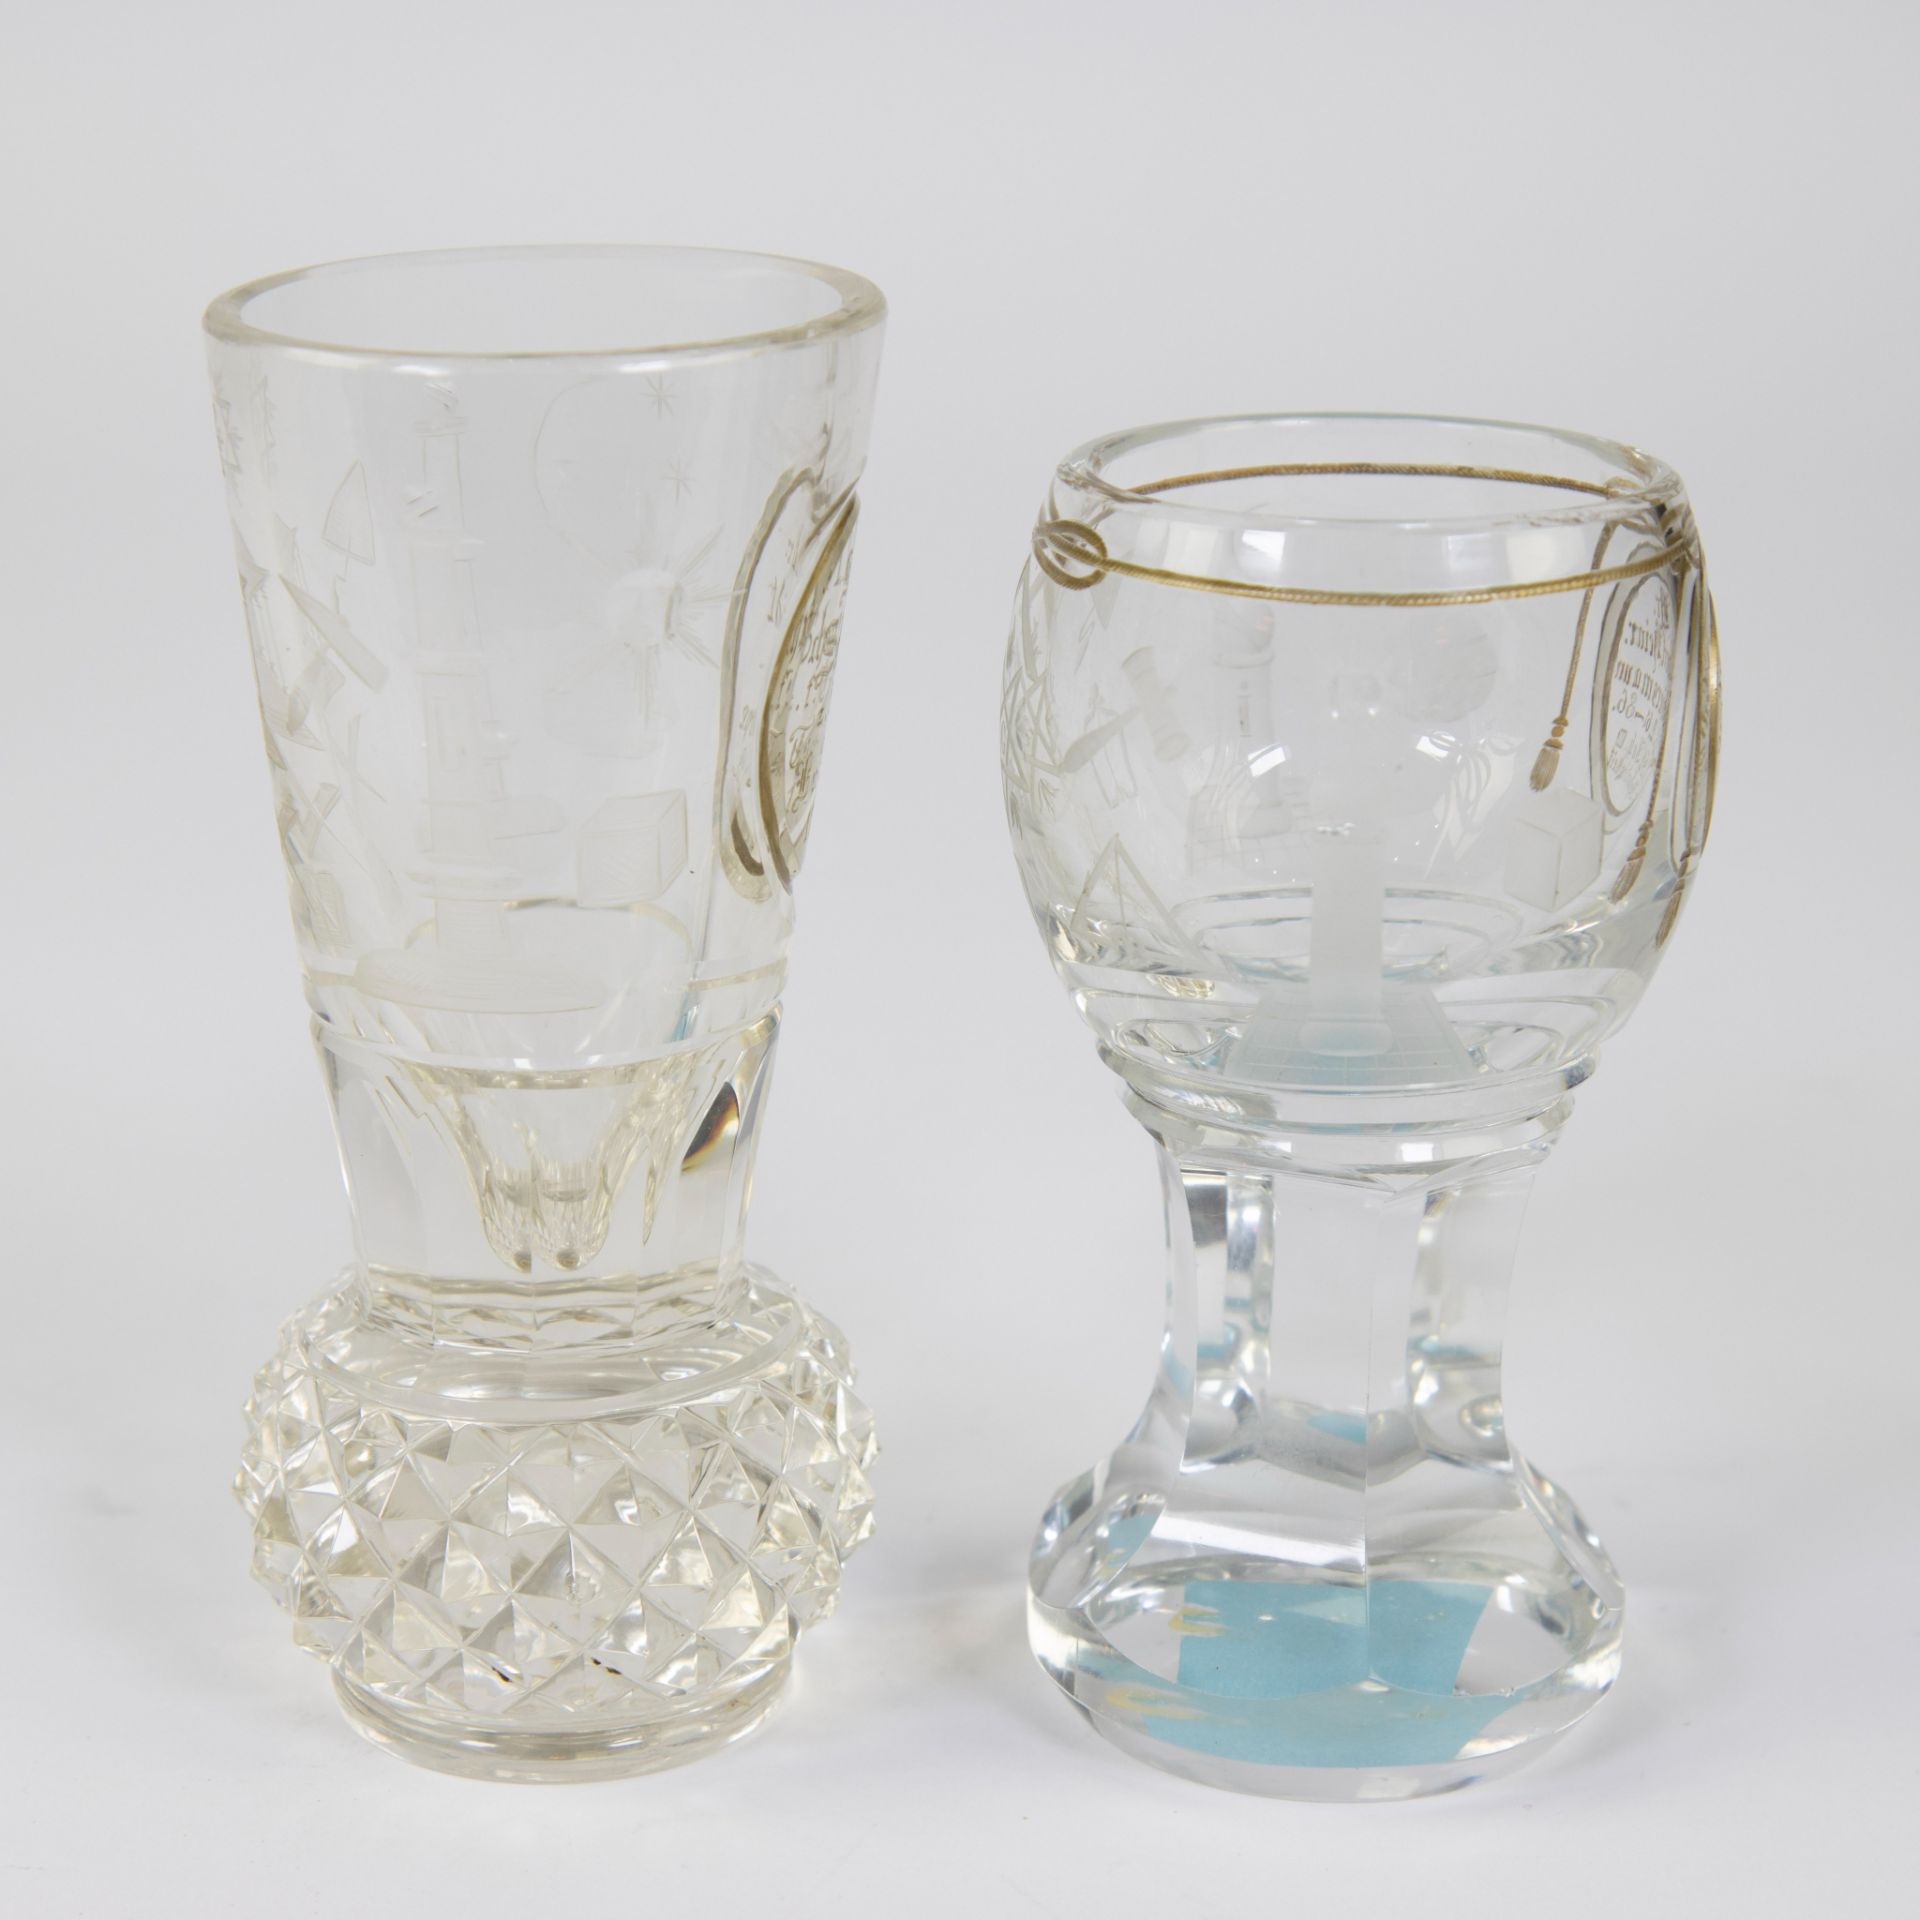 2 heavy crystal glasses with gold decoration of Freemasonry, 19th/20th century - Image 4 of 4